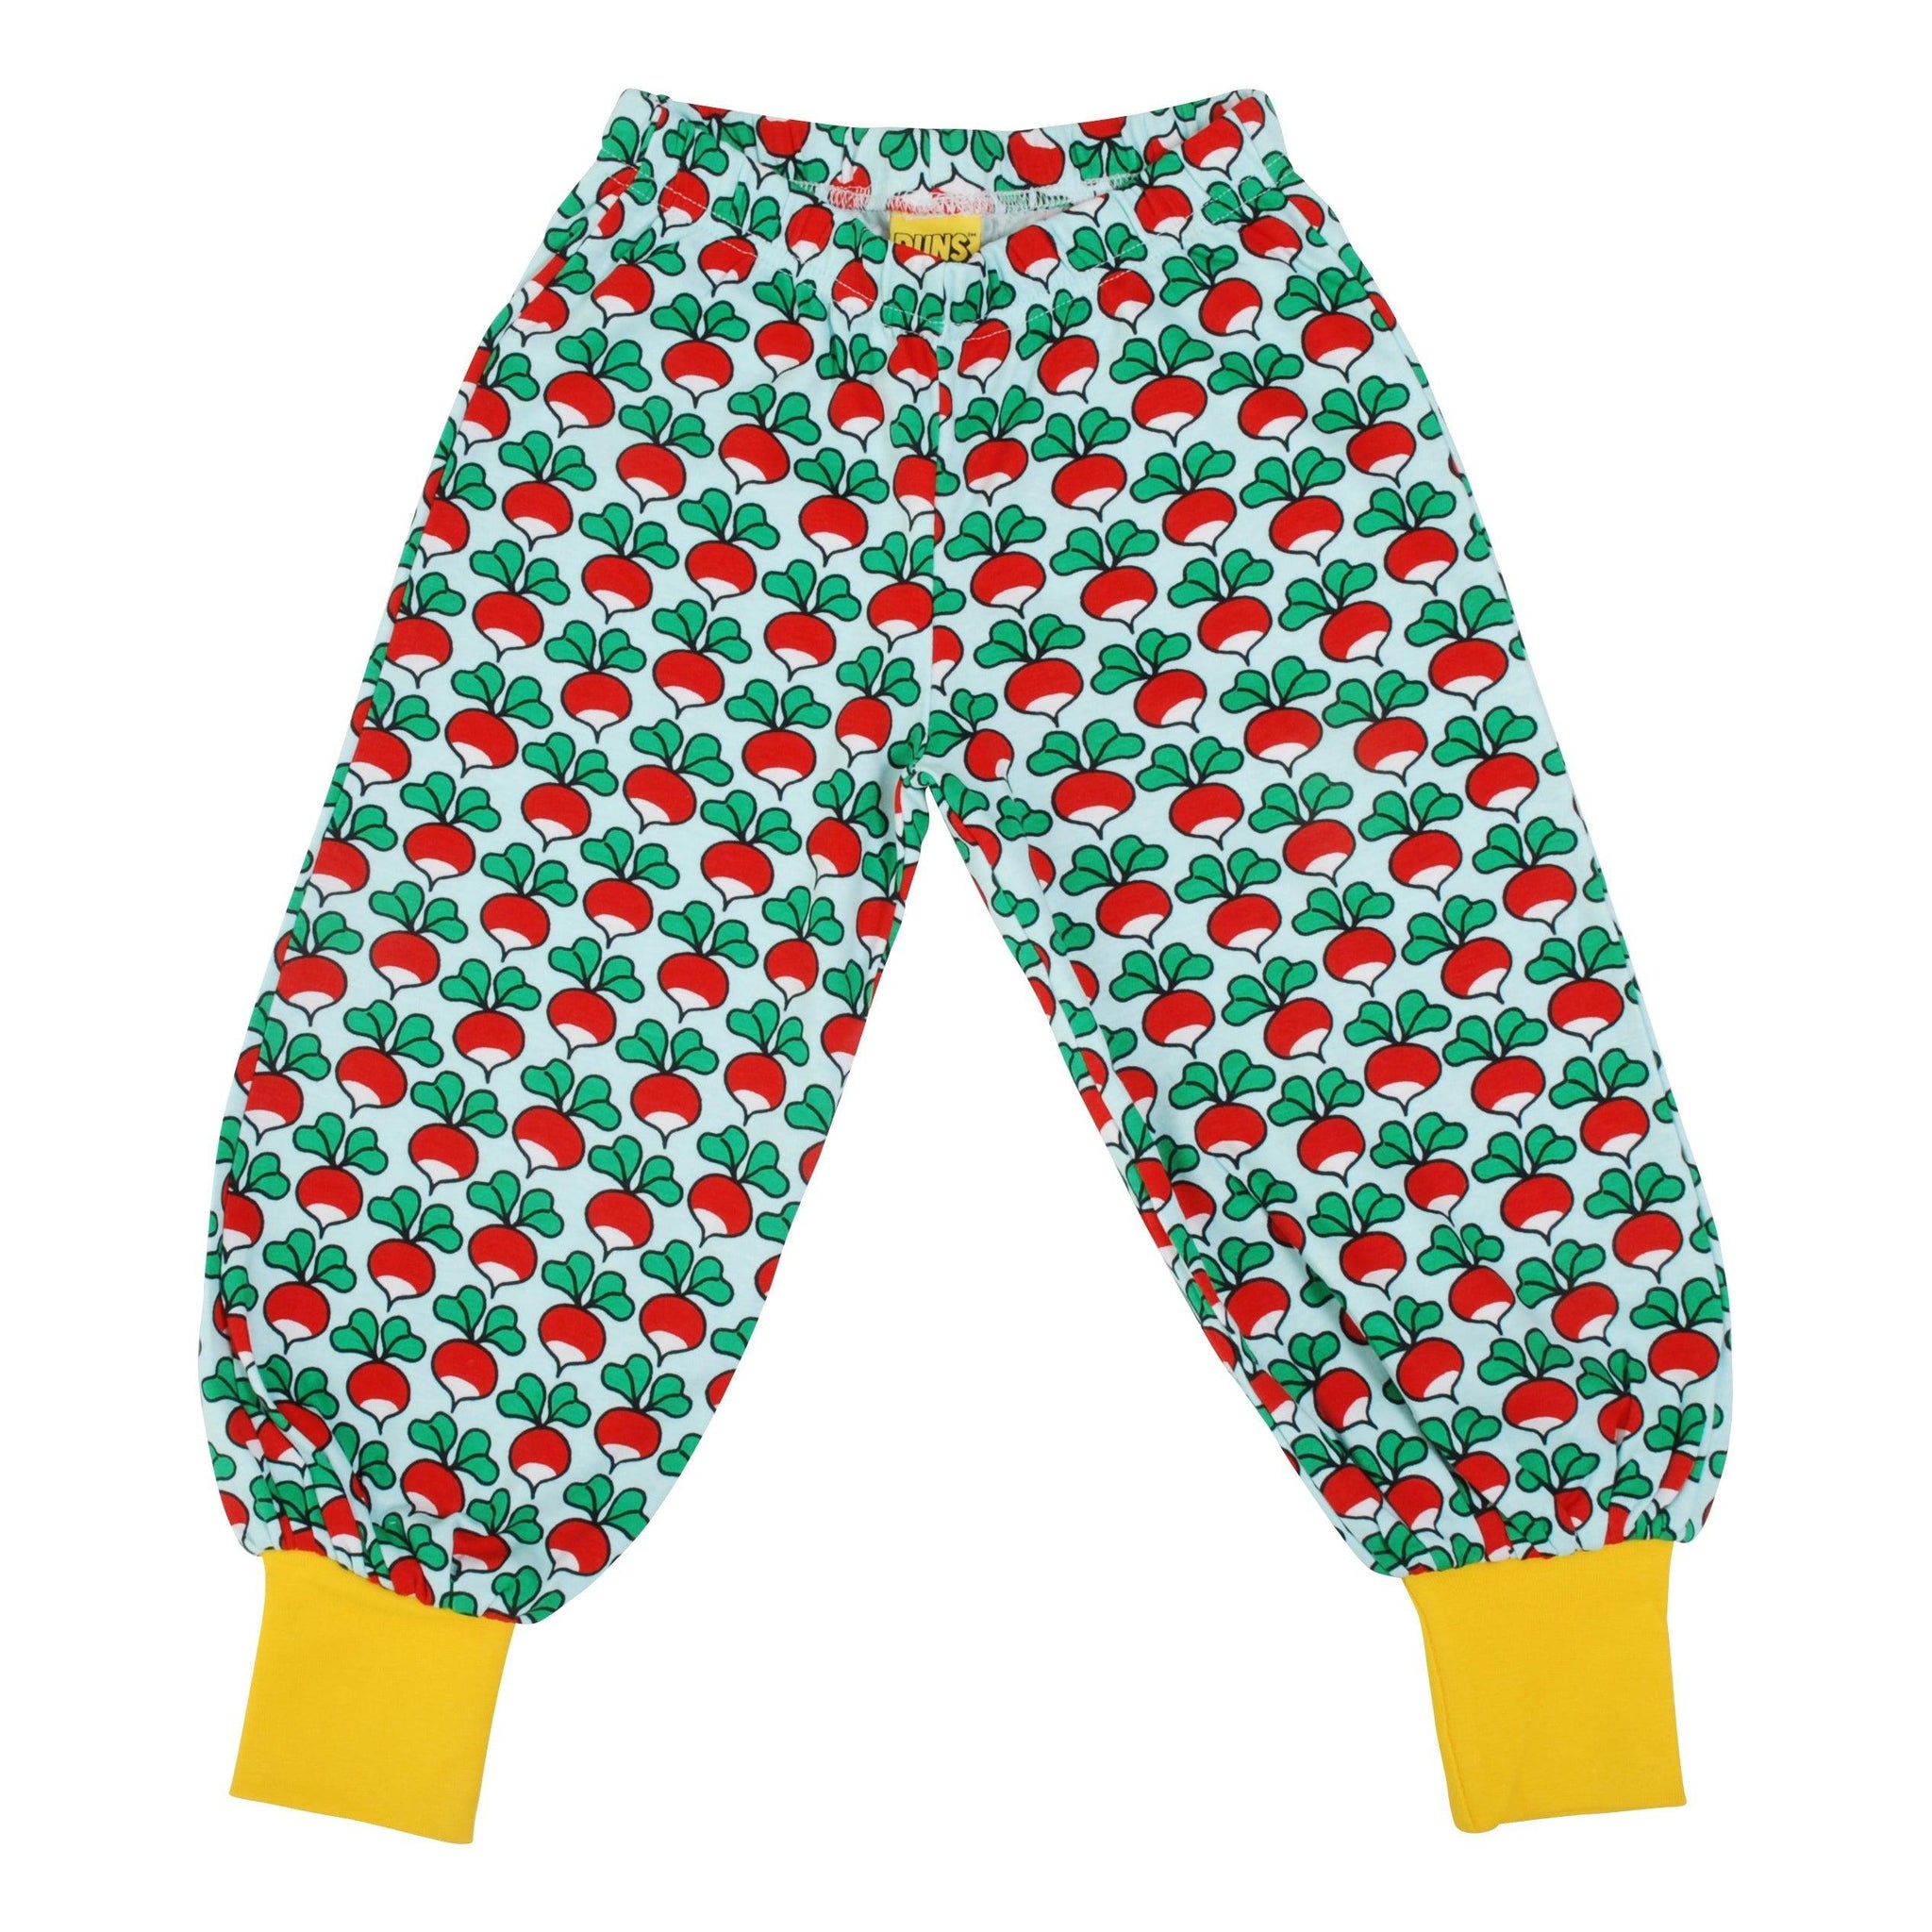 DUNS Sweden - Radish Baggy Pants (Clearwater) (10-12 Years)